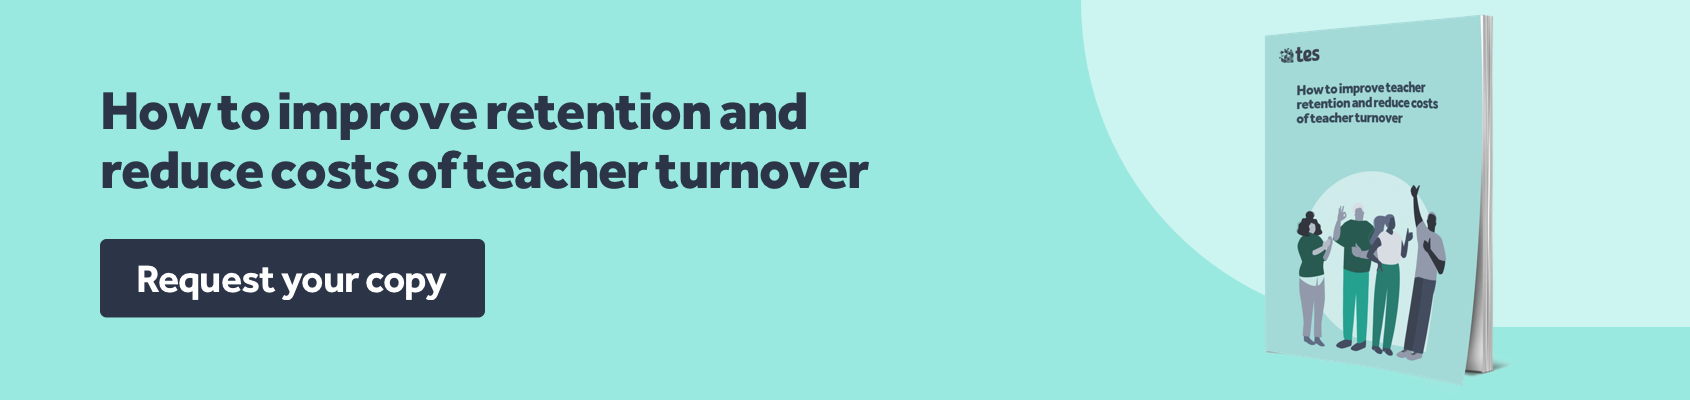 How to improve retention and reduce turnover